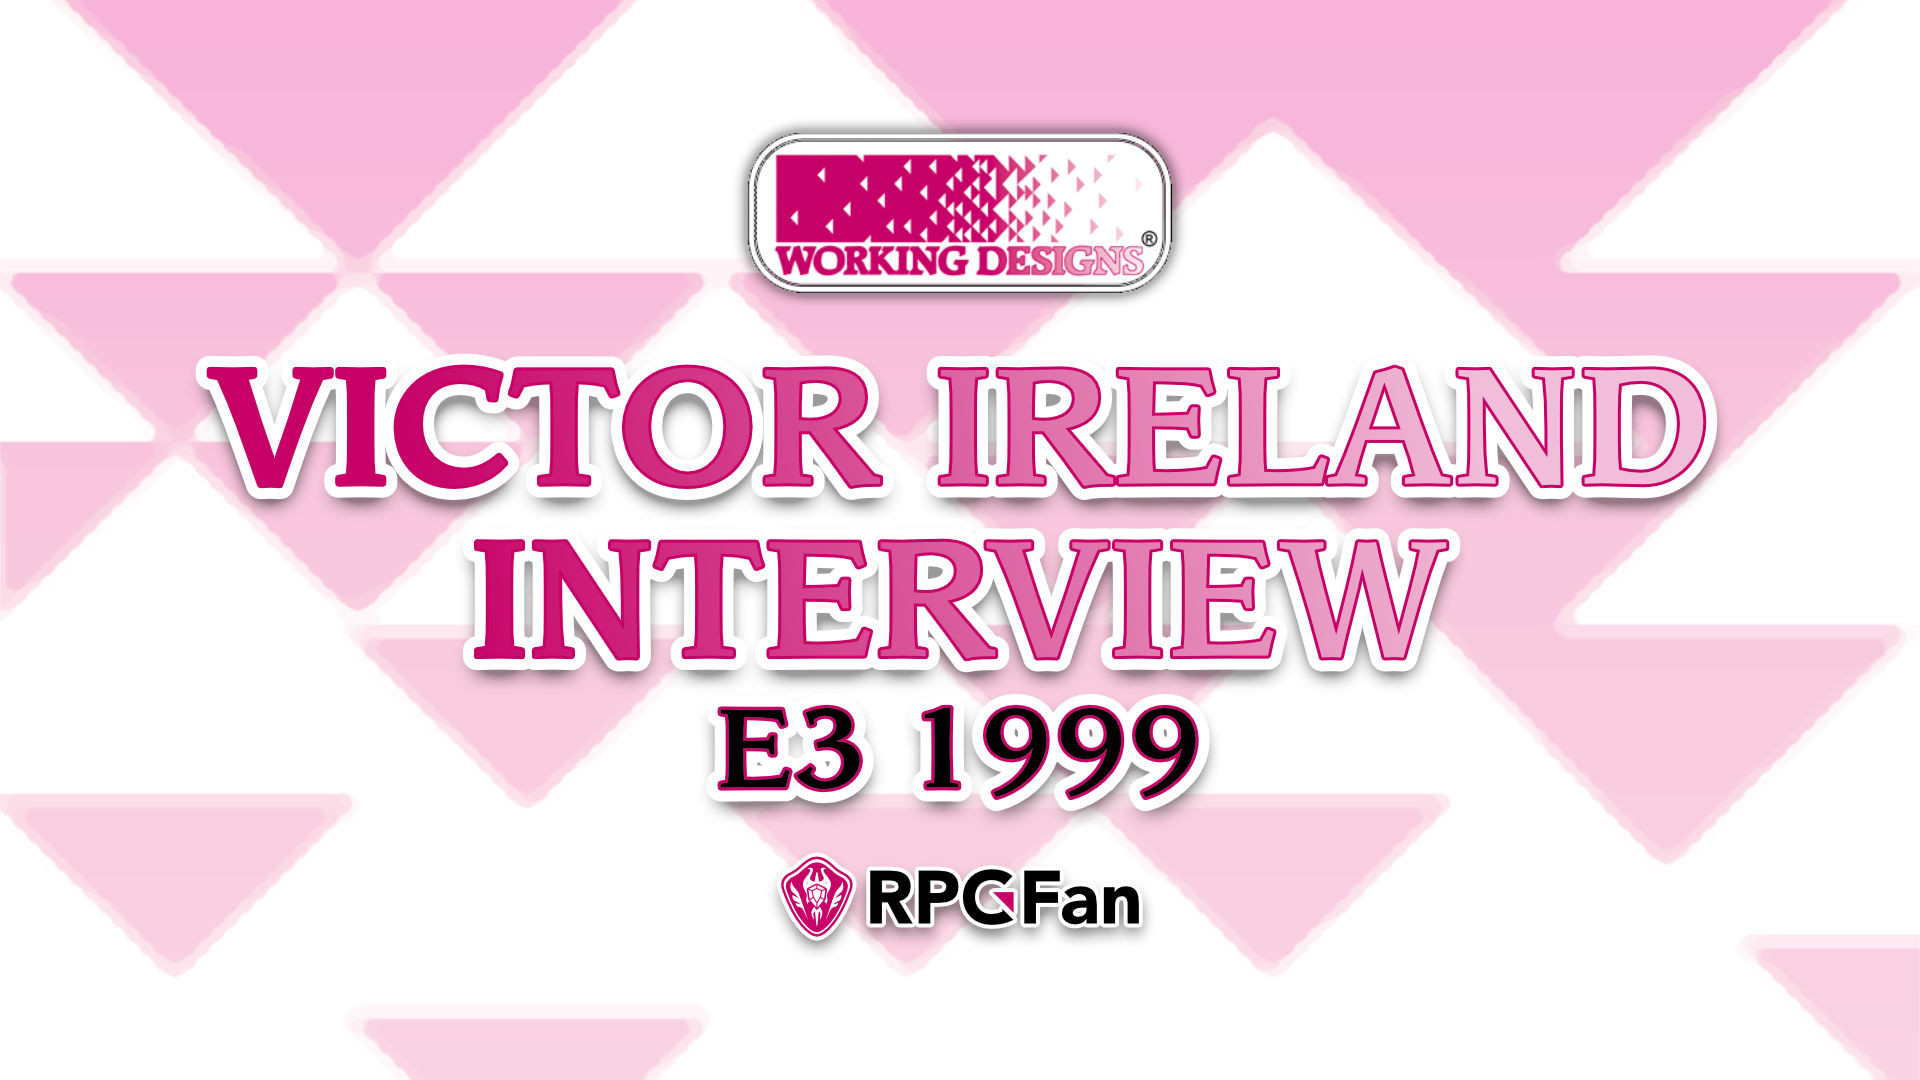 Victor Ireland Interview E3 1999 Featured